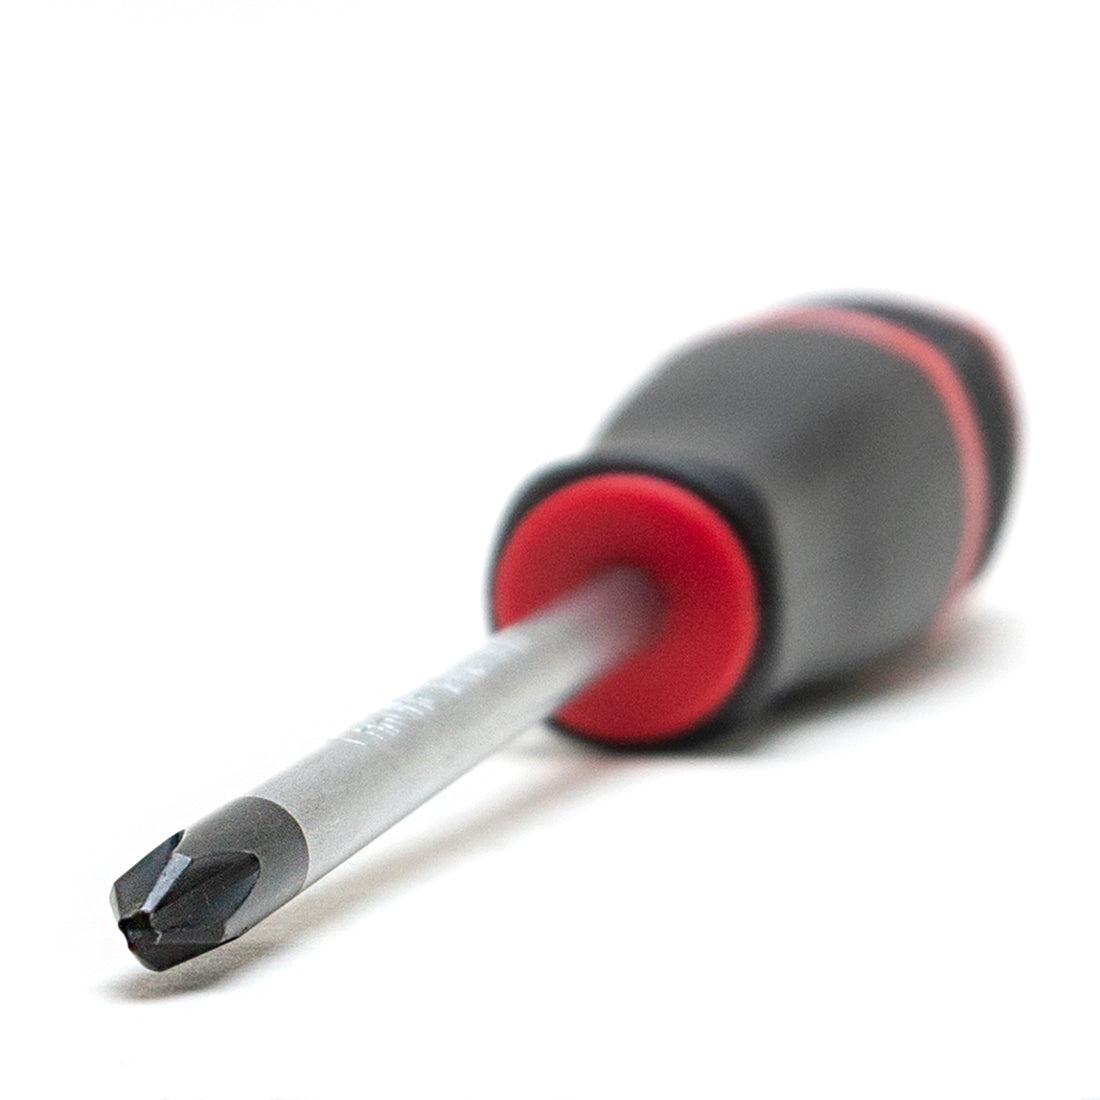 close up of philips head screwdriver tip